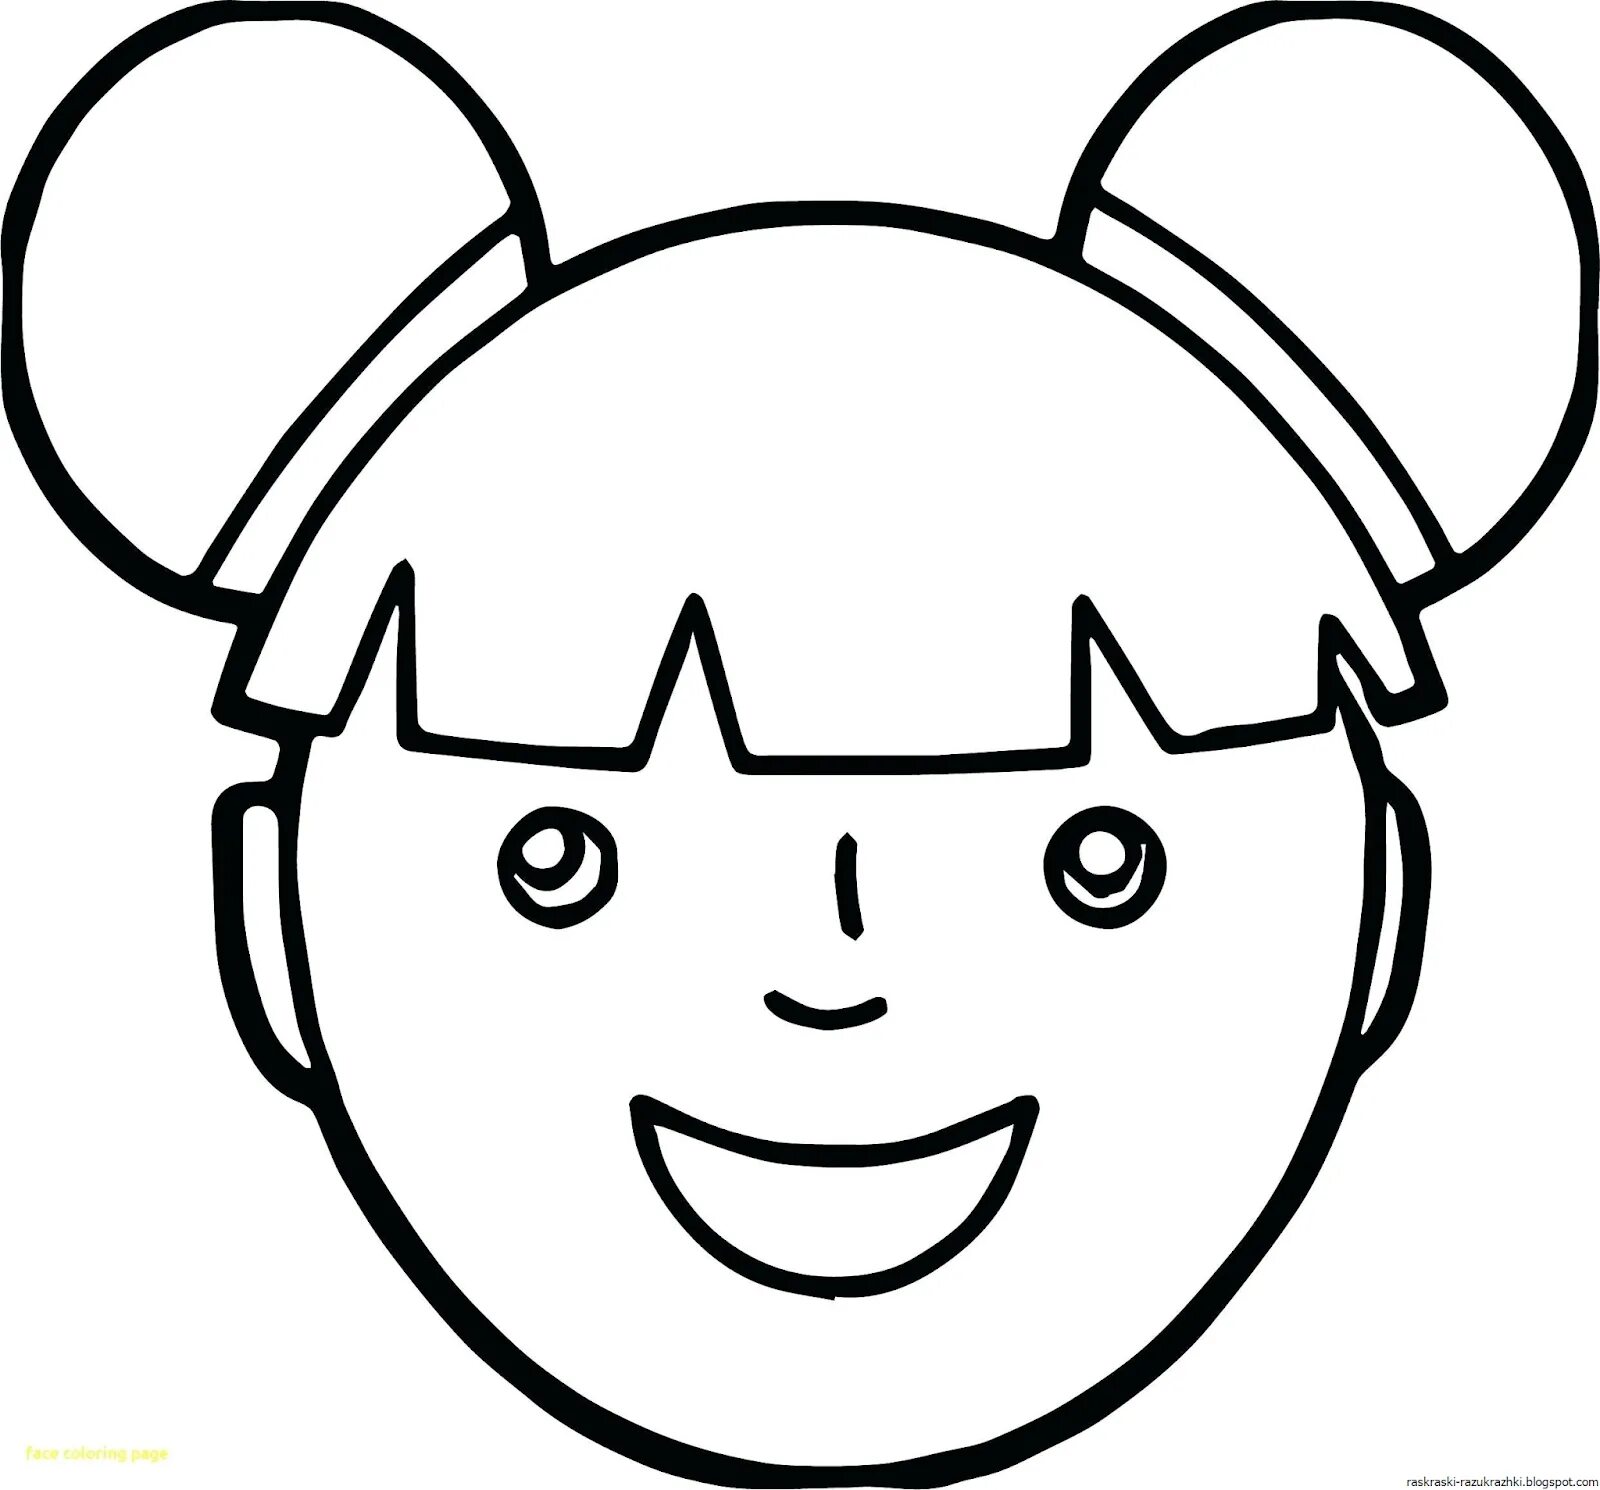 Live baby face coloring book for kids